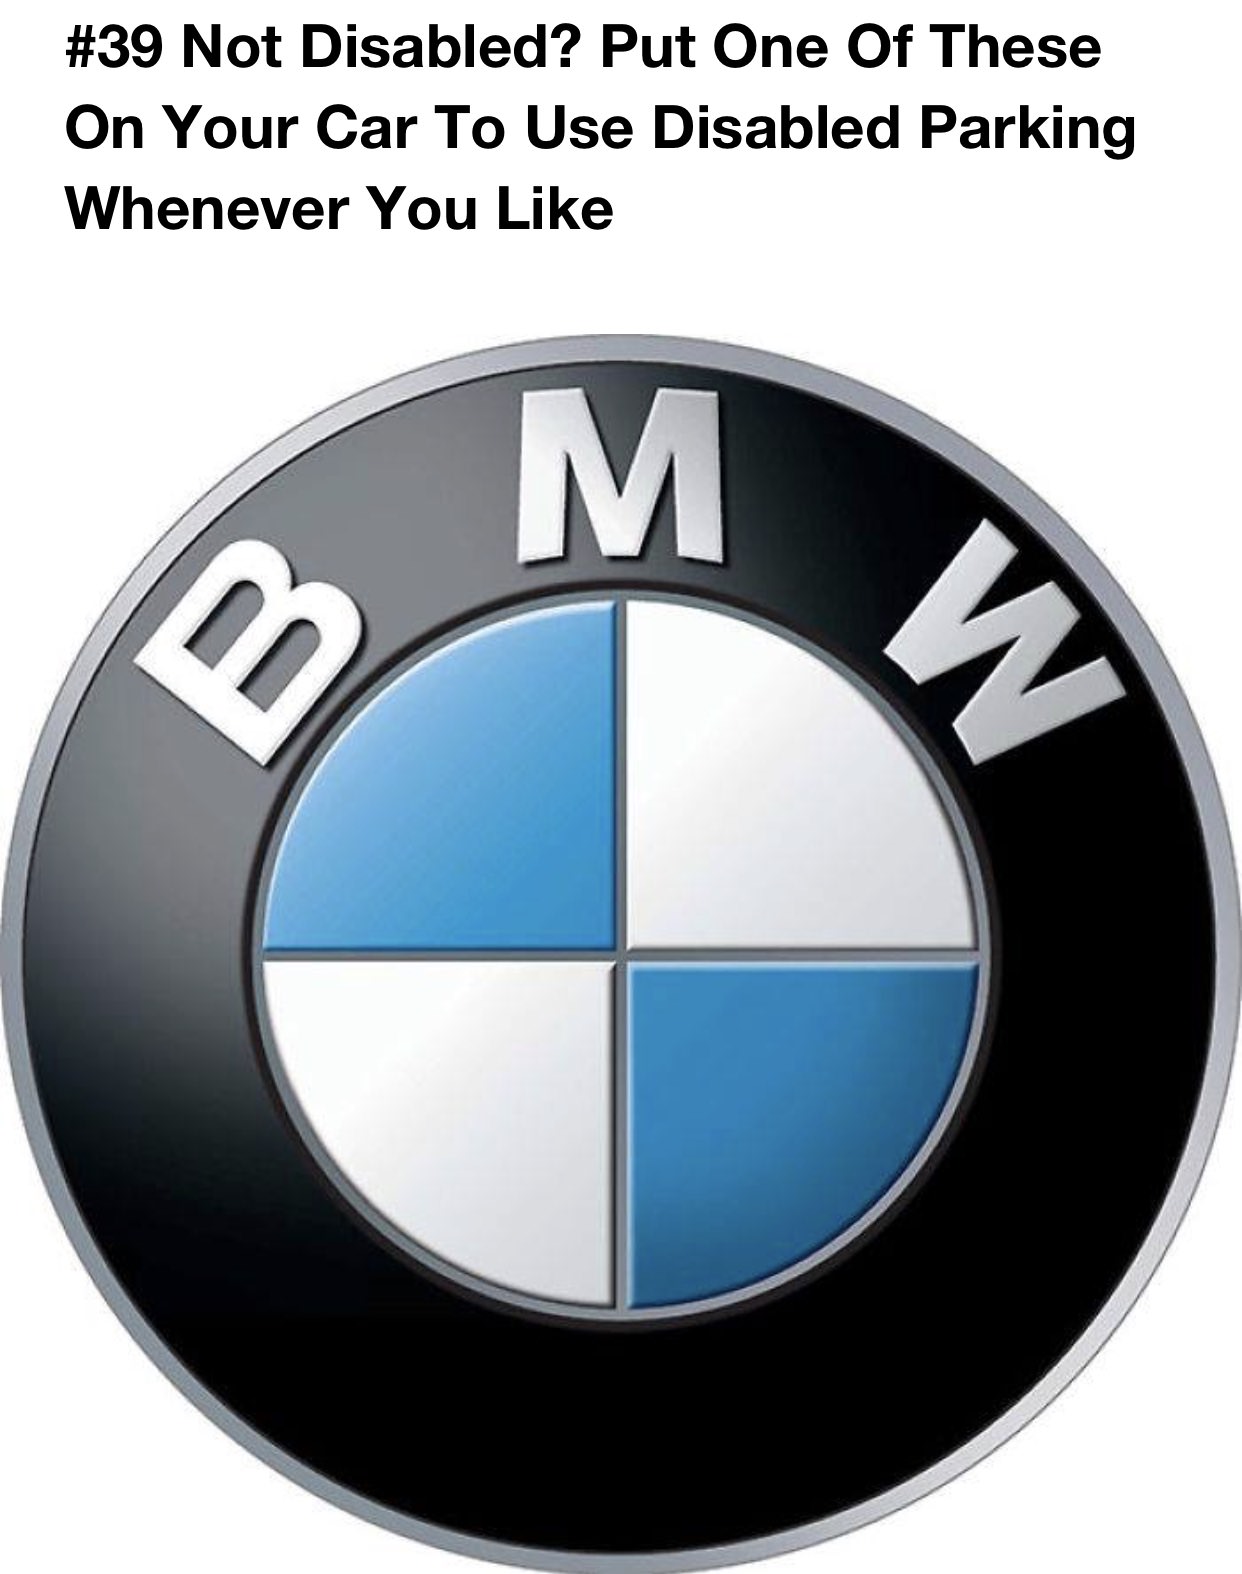 reeves bmw logos - Not Disabled? Put One Of These On Your Car To Use Disabled Parking Whenever You M